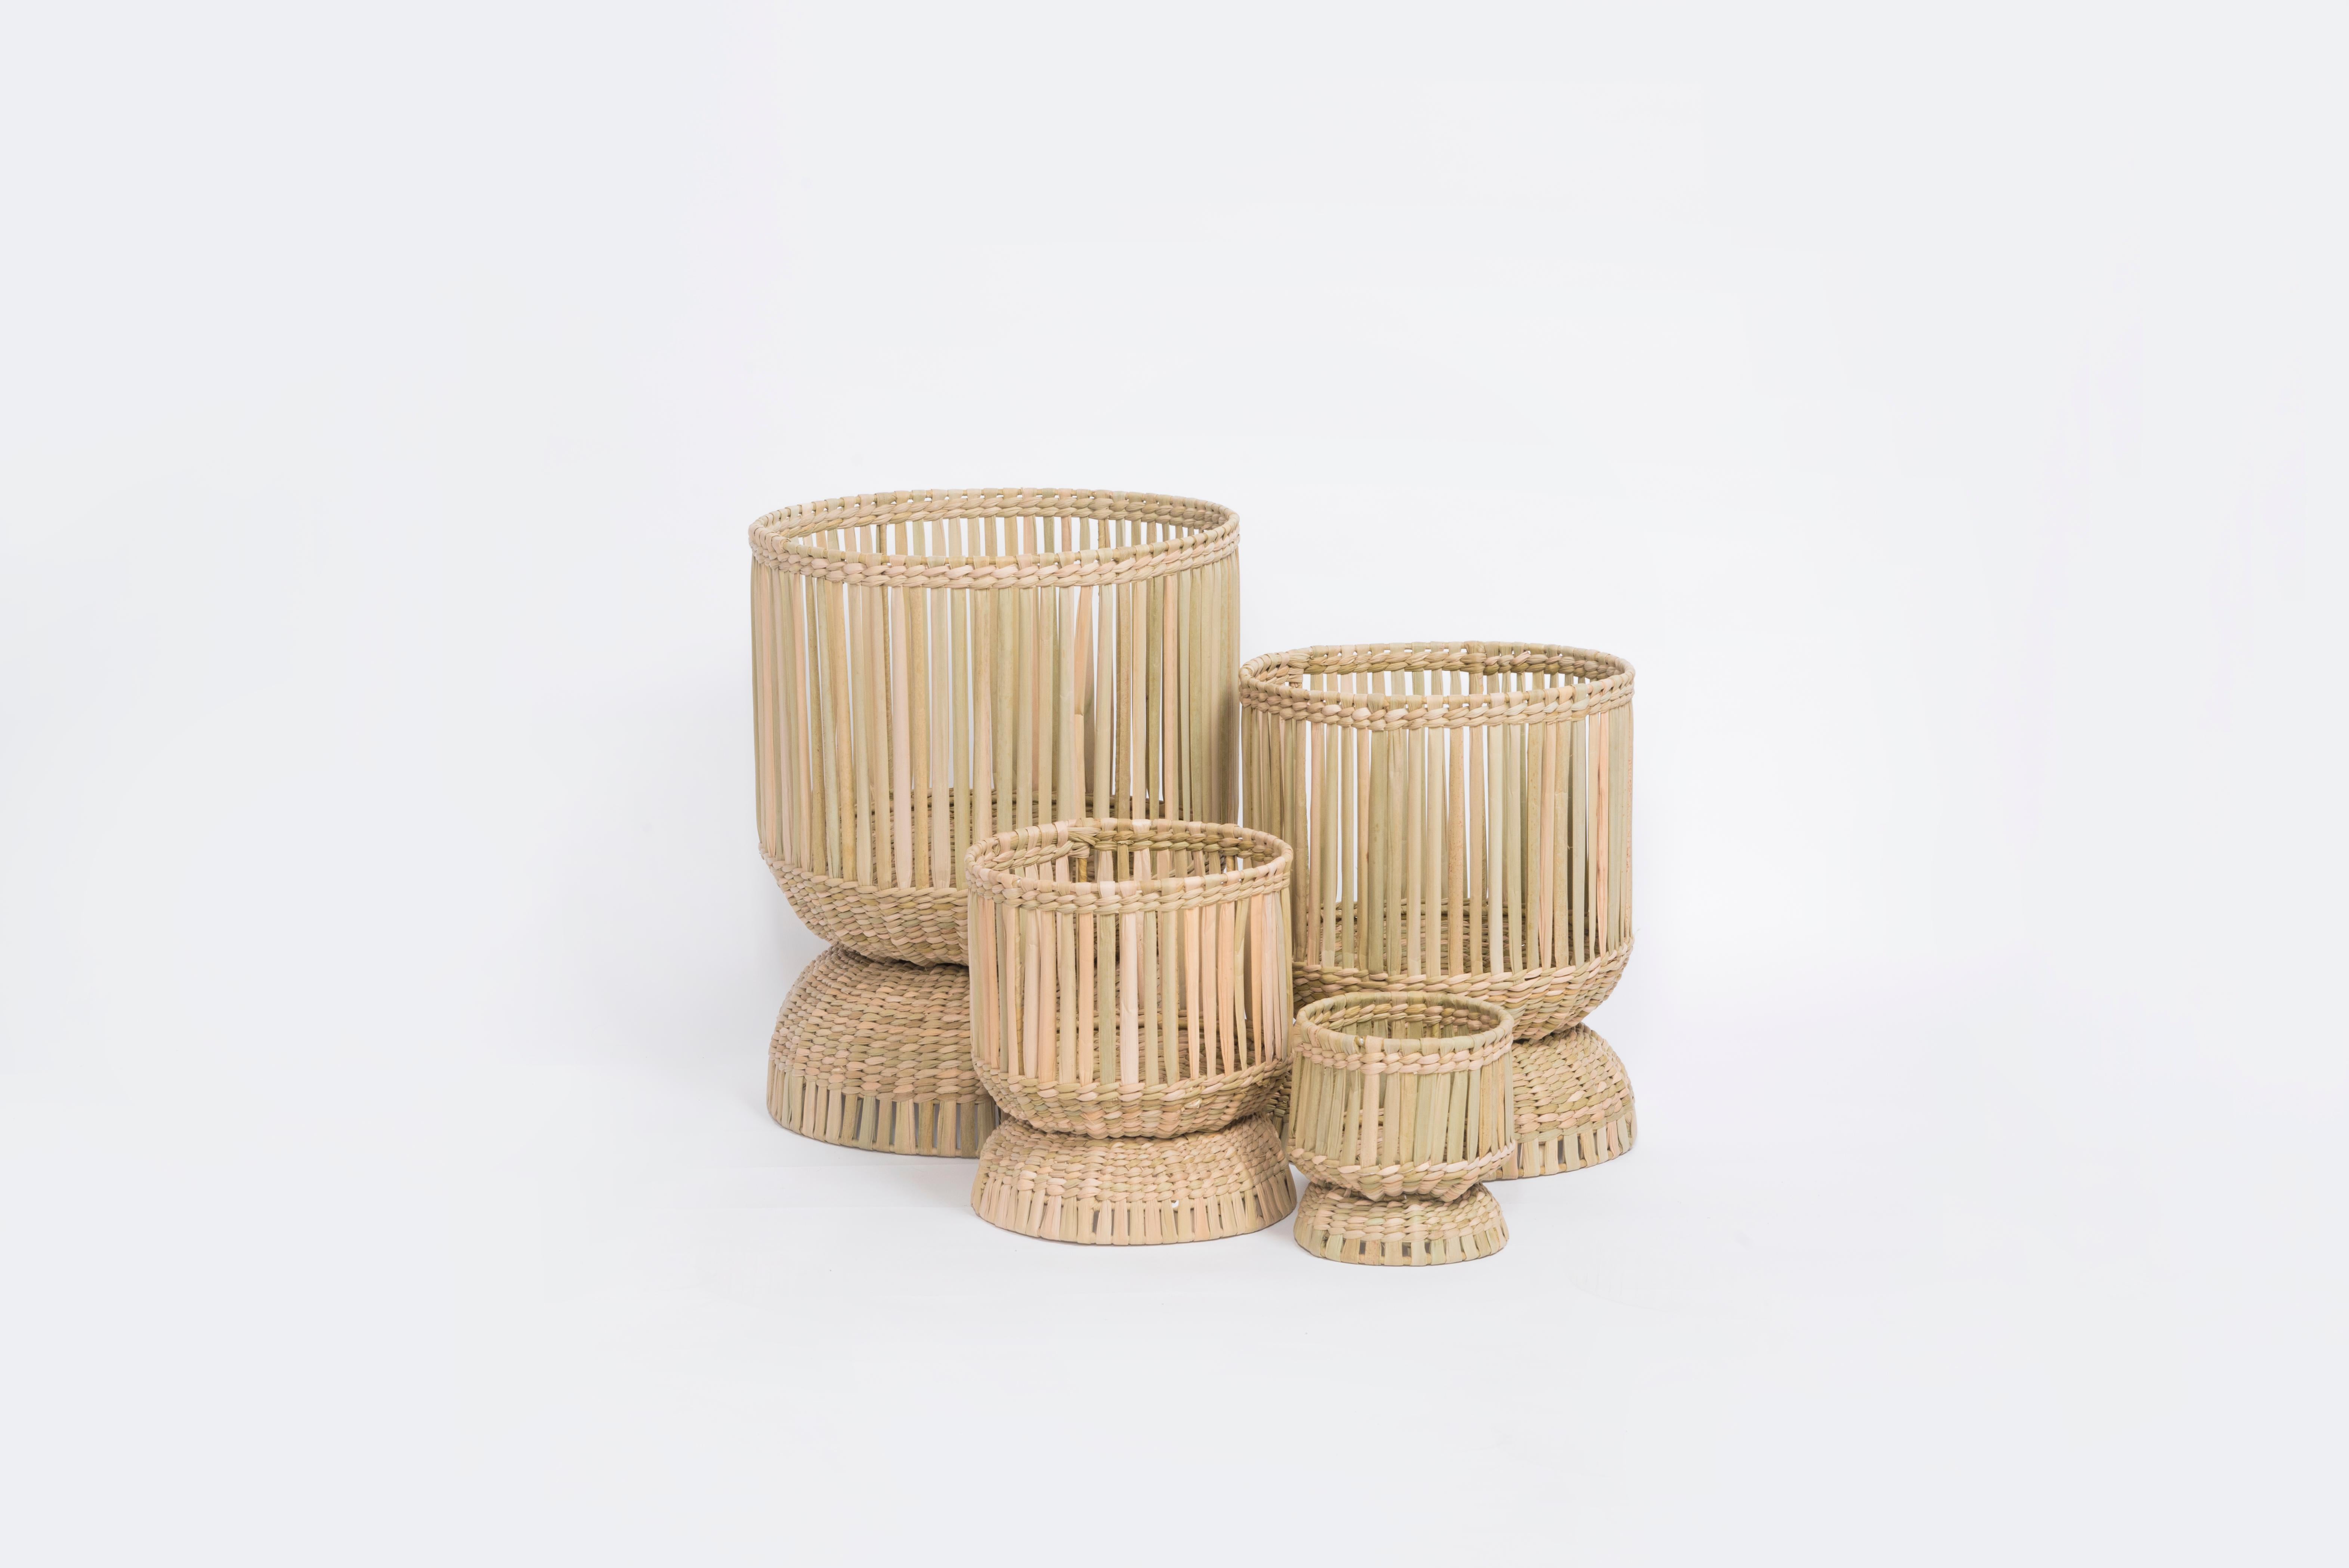 A set of plant pots carefully hand weaved with chuspata natural fiber. The set comes with four plant pots in different sizes 44 x 56 cm, 34 x 43 cm, 28 x 31 cm 
and 18 x 19 cm.

The chuspata is a reed that grows on the shores of the Pátzcuaro